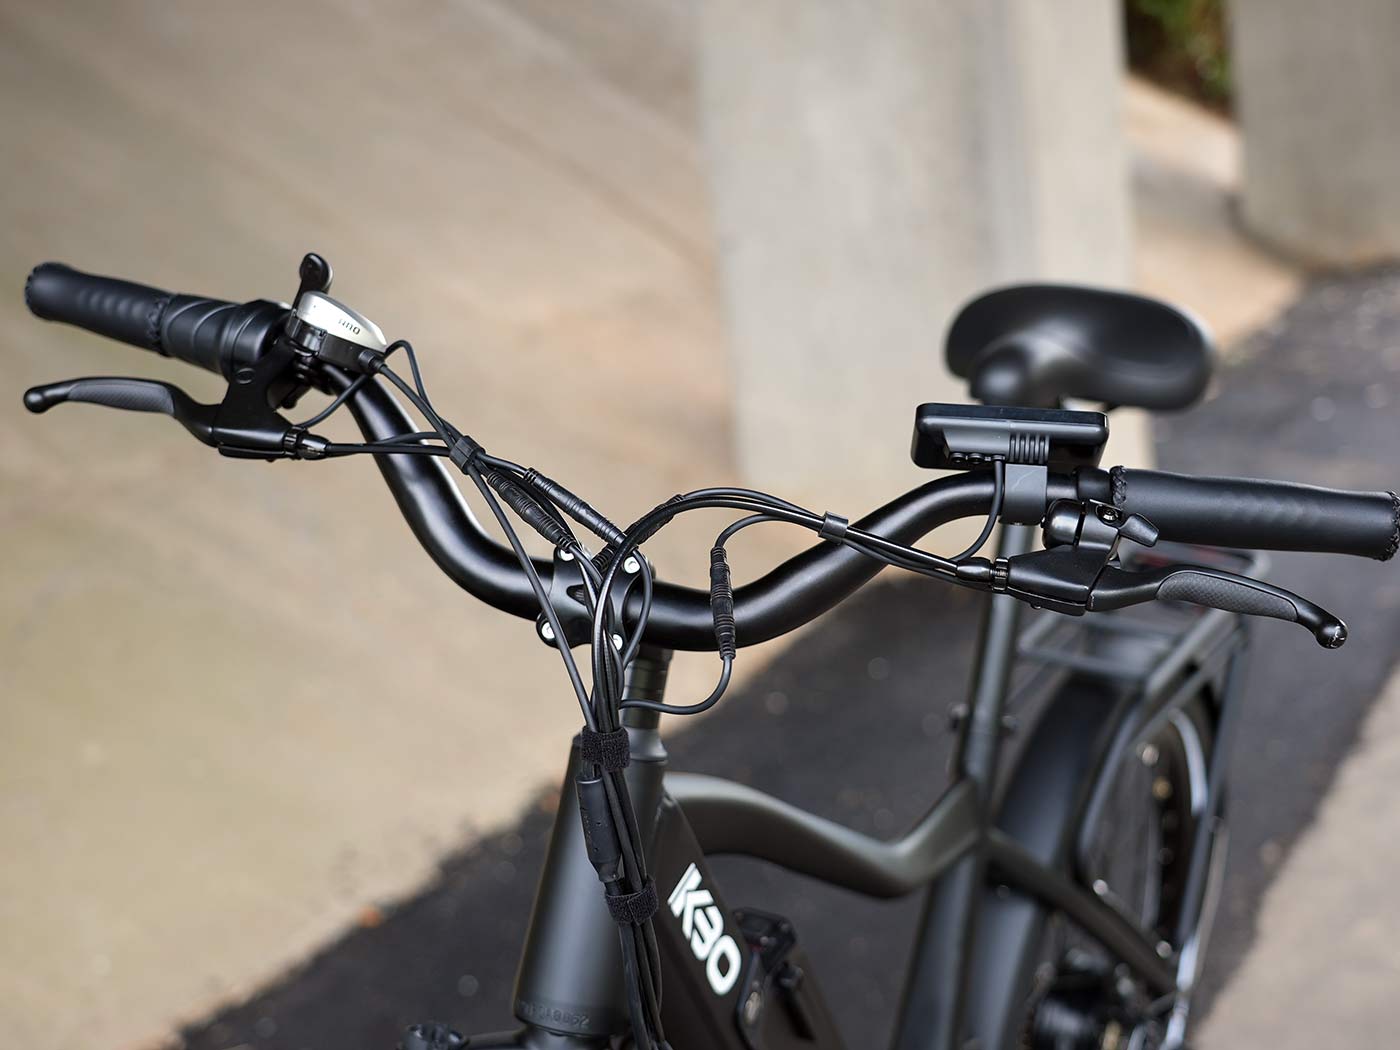 cockpit and wires for the kbo breeze commuter e-bike